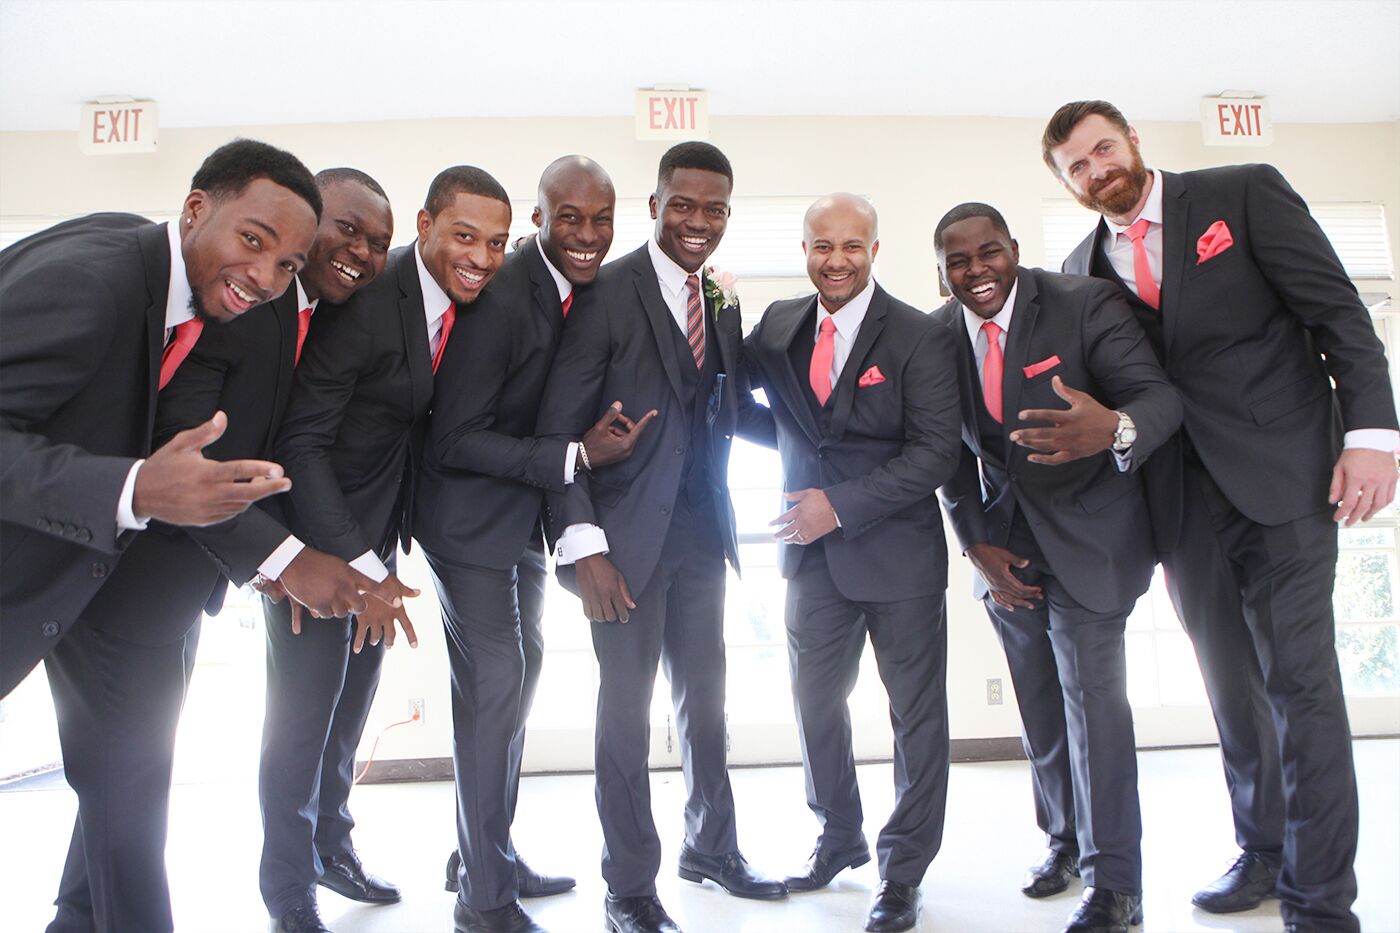 Groomsmen In Black Tuxedos With Coral Ties